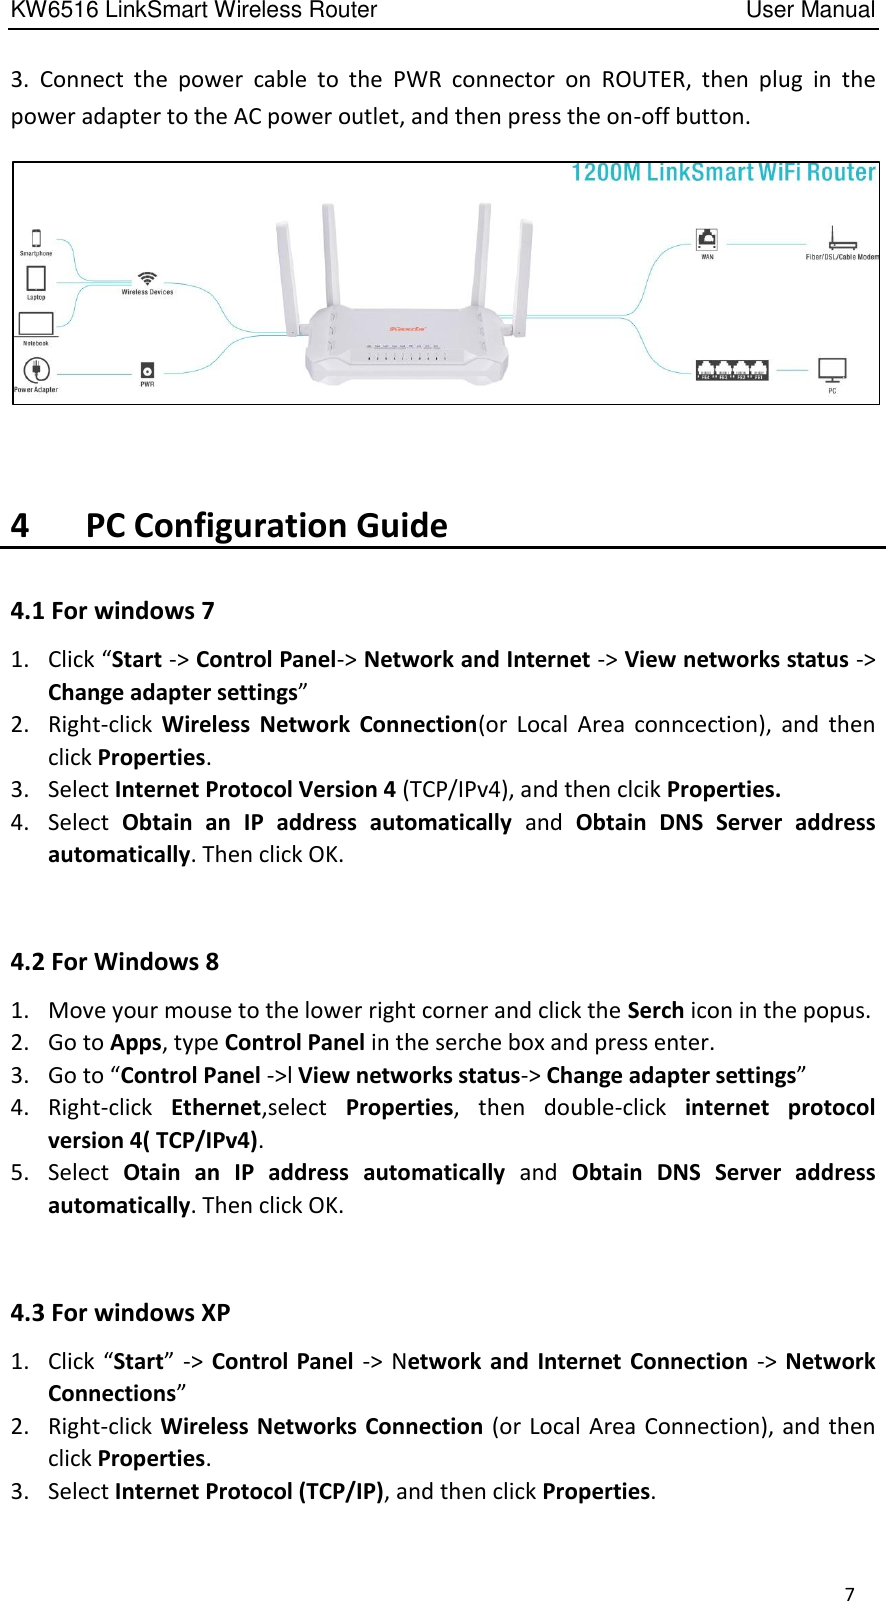 KW6516 LinkSmart Wireless Router         User Manual 7 3.  Connect  the  power  cable  to  the  PWR  connector  on  ROUTER,  then plug  in  the power adapter to the AC power outlet, and then press the on-off button.   4      PC Configuration Guide 4.1 For windows 7 1. Click “Start -&gt; Control Panel-&gt; Network and Internet -&gt; View networks status -&gt; Change adapter settings” 2. Right-click  Wireless  Network  Connection(or  Local  Area  conncection),  and  then click Properties. 3. Select Internet Protocol Version 4 (TCP/IPv4), and then clcik Properties. 4. Select  Obtain  an  IP  address  automatically  and  Obtain  DNS  Server  address automatically. Then click OK.  4.2 For Windows 8   1. Move your mouse to the lower right corner and click the Serch icon in the popus. 2. Go to Apps, type Control Panel in the serche box and press enter. 3. Go to “Control Panel -&gt;l View networks status-&gt; Change adapter settings” 4. Right-click  Ethernet,select  Properties,  then  double-click  internet  protocol version 4( TCP/IPv4). 5. Select  Otain  an  IP  address  automatically  and  Obtain  DNS  Server  address automatically. Then click OK.  4.3 For windows XP 1. Click “Start”  -&gt;  Control Panel  -&gt;  Network and  Internet Connection  -&gt; Network Connections” 2. Right-click Wireless Networks Connection (or Local Area Connection), and then click Properties. 3. Select Internet Protocol (TCP/IP), and then click Properties. 